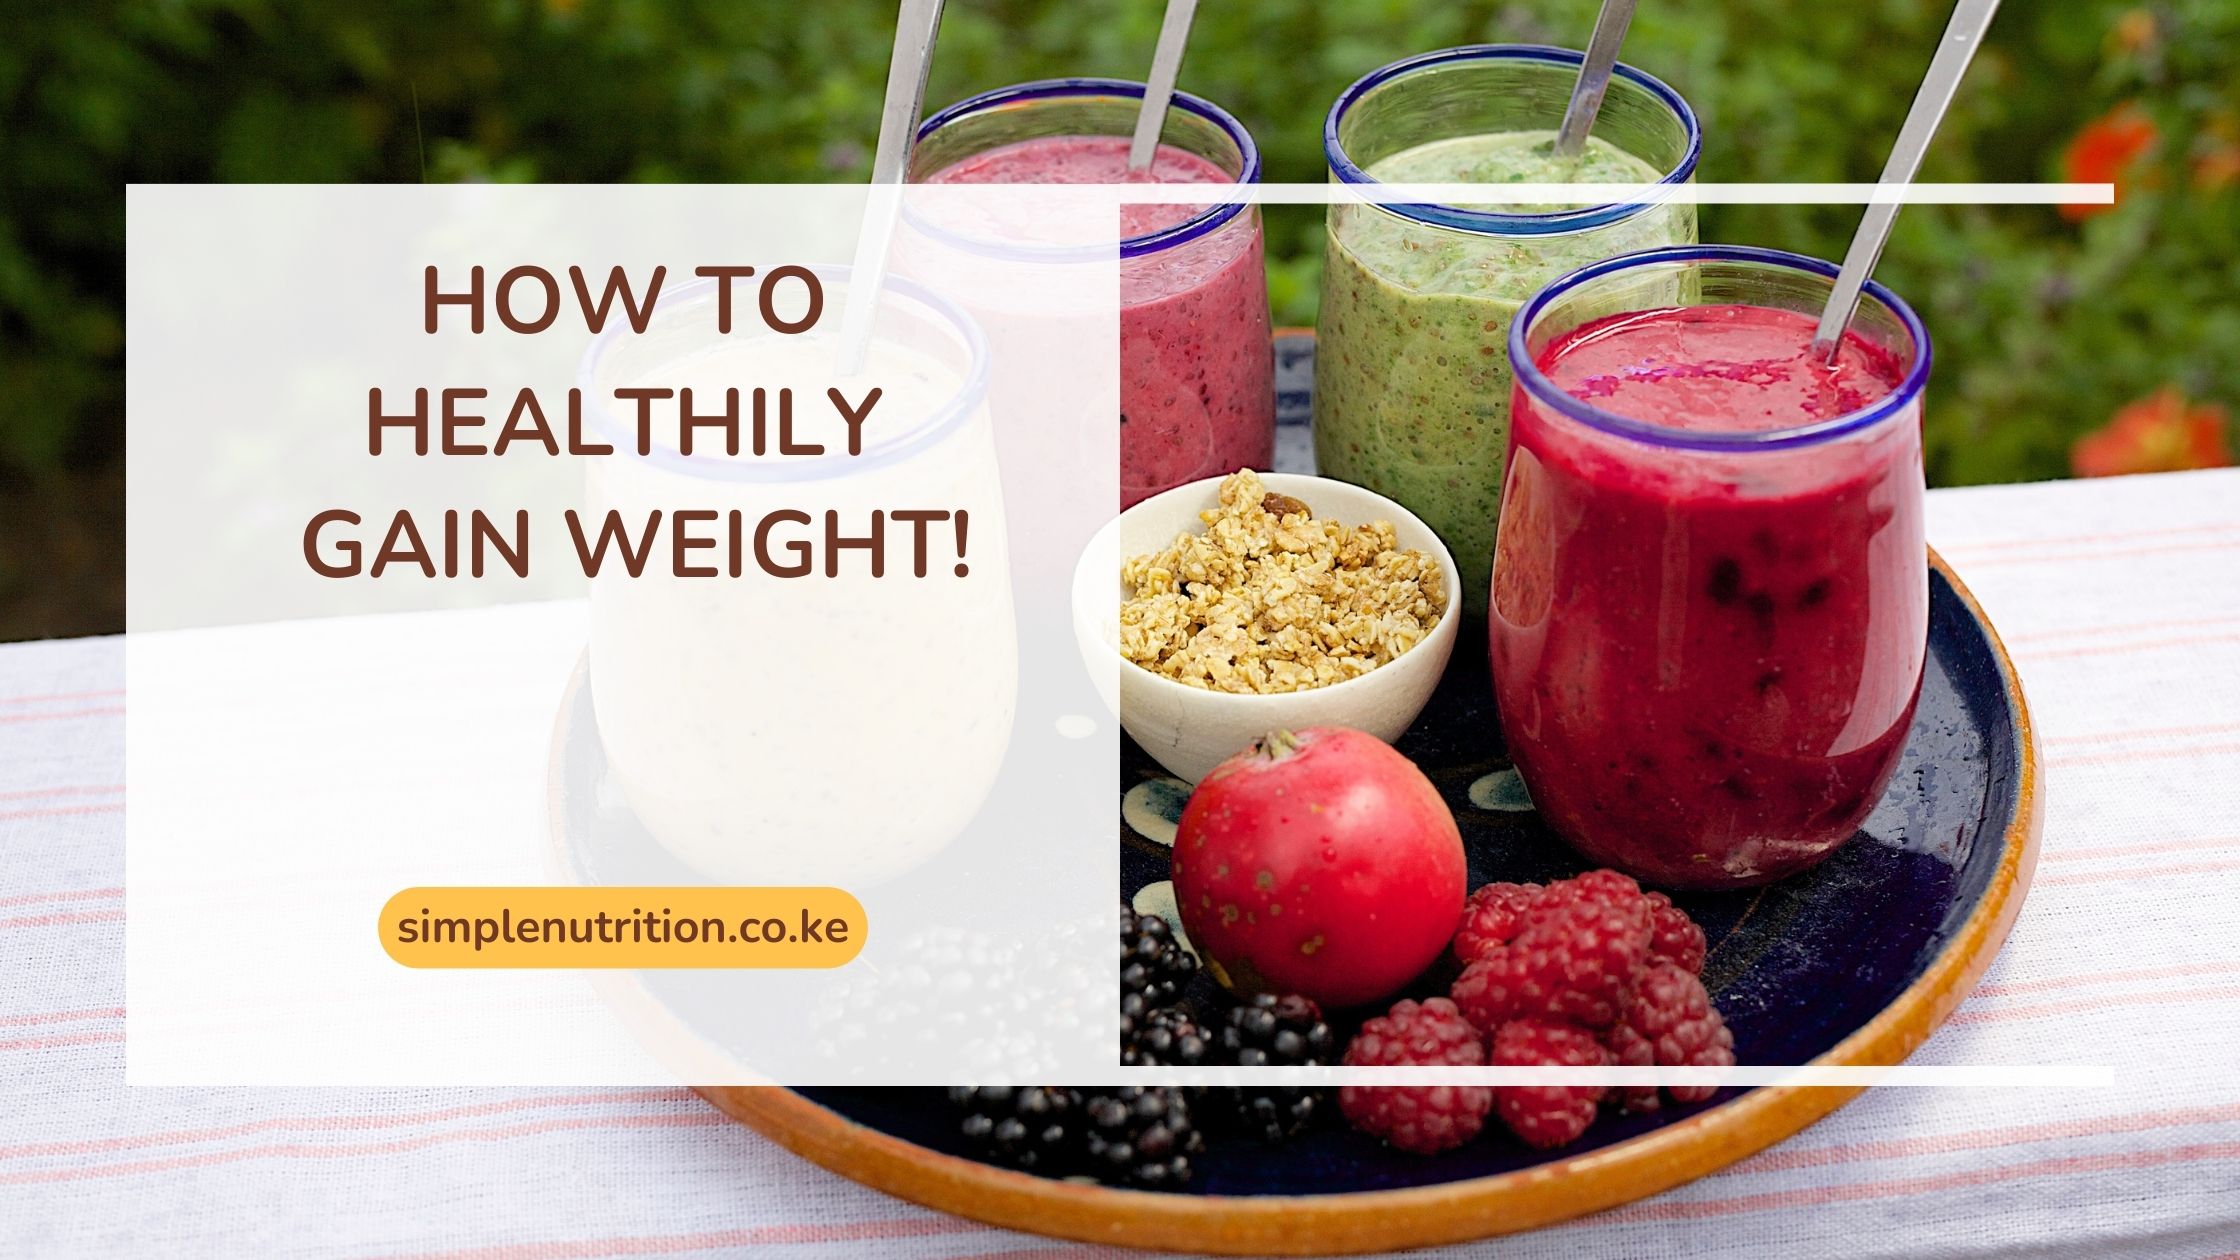 How to healthily gain weight!